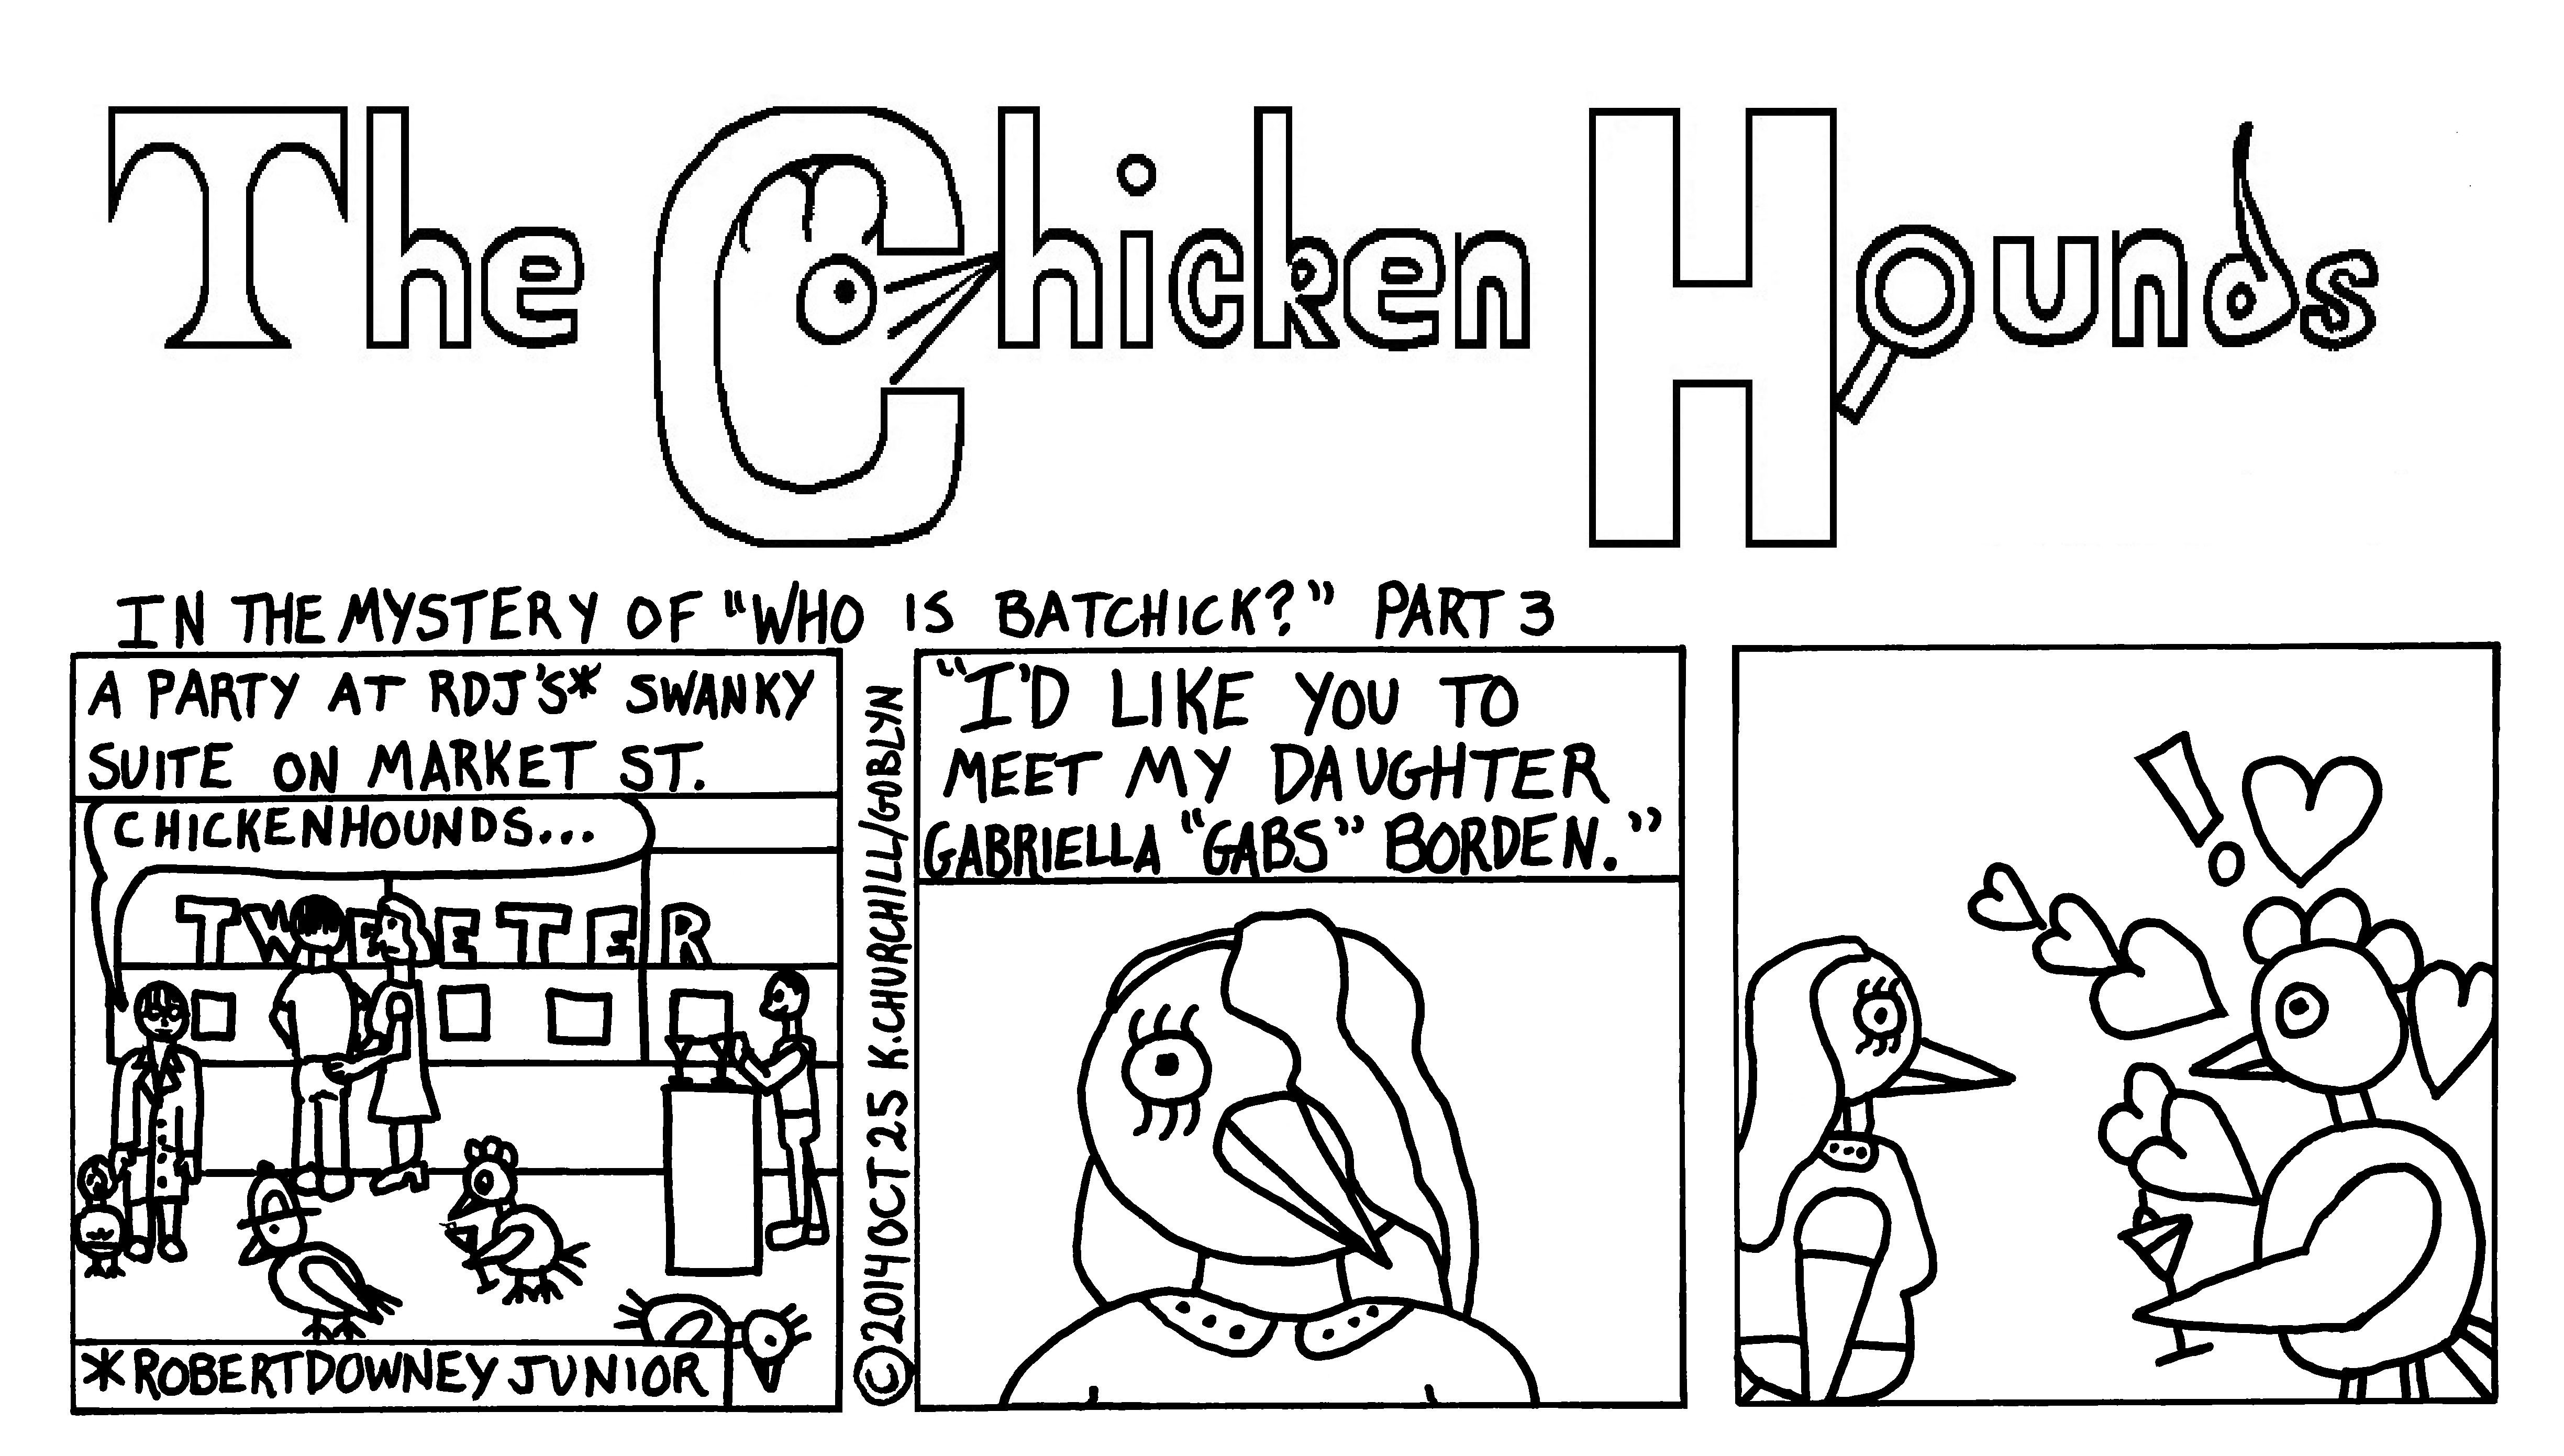 The Chicken Hounds in the Mystery of "Who is Batchick?" Part 3